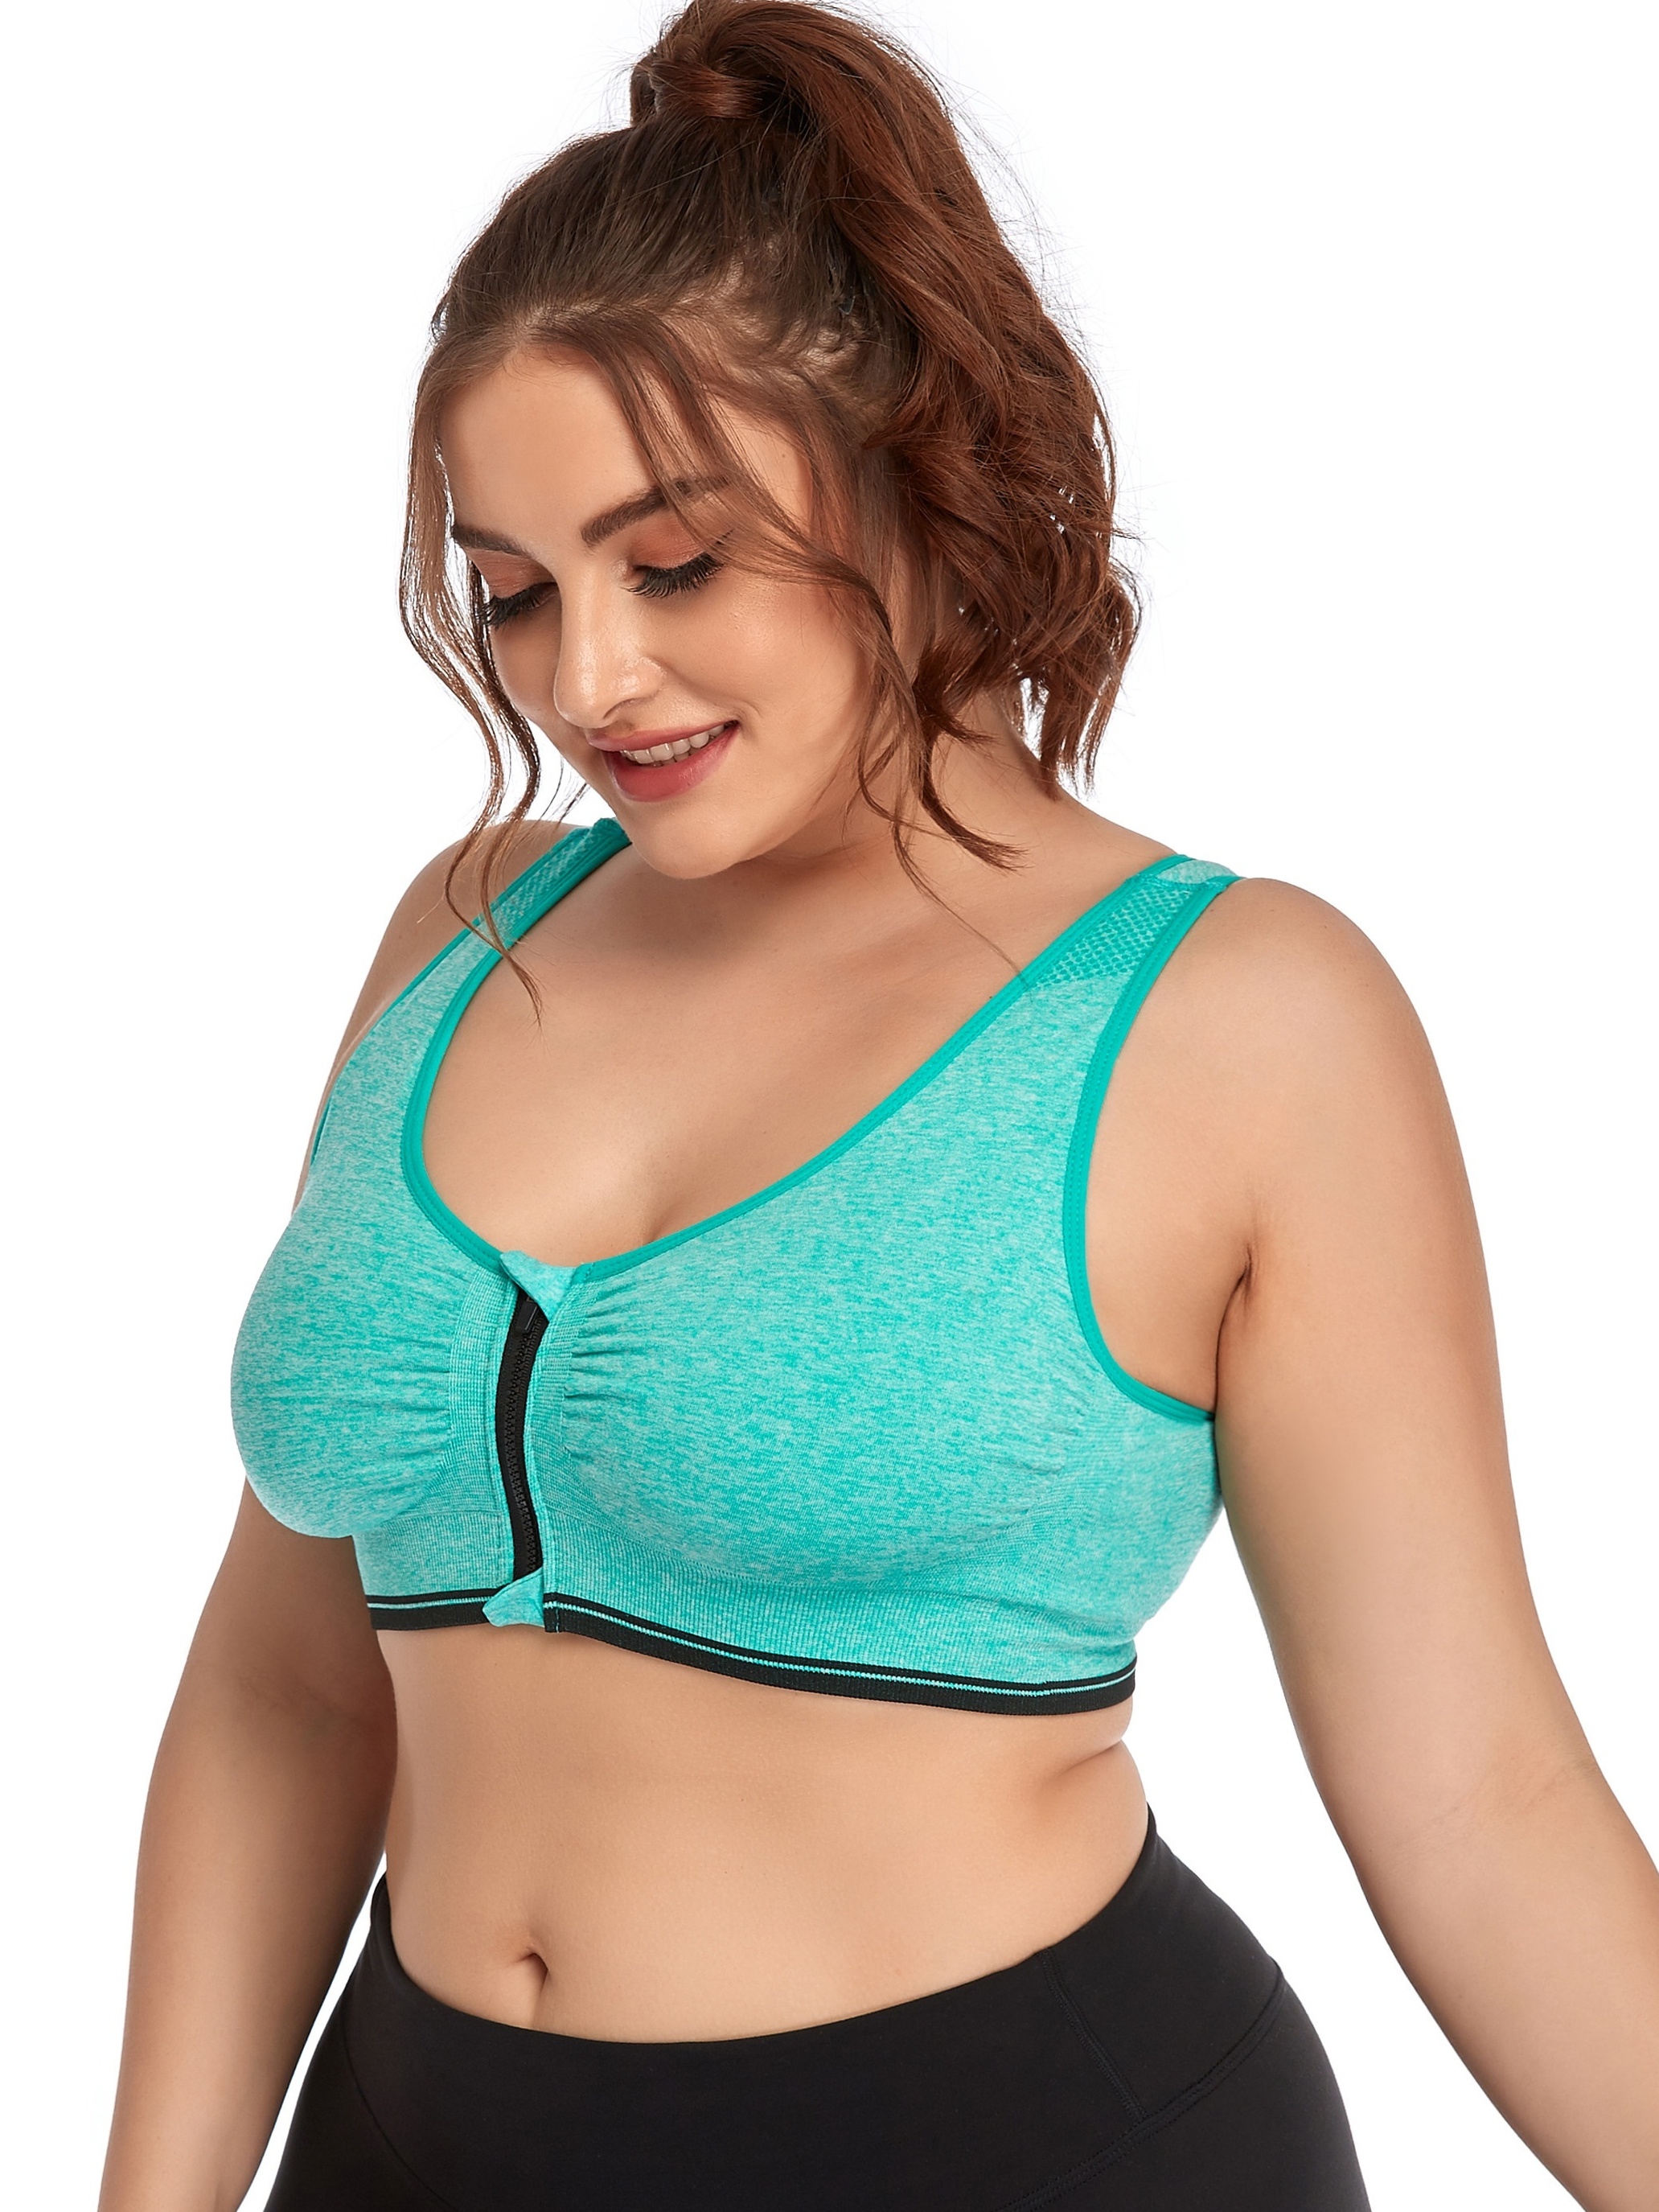 PMUYBHF Sports Bras for Women Plus Size with Padding Smooth